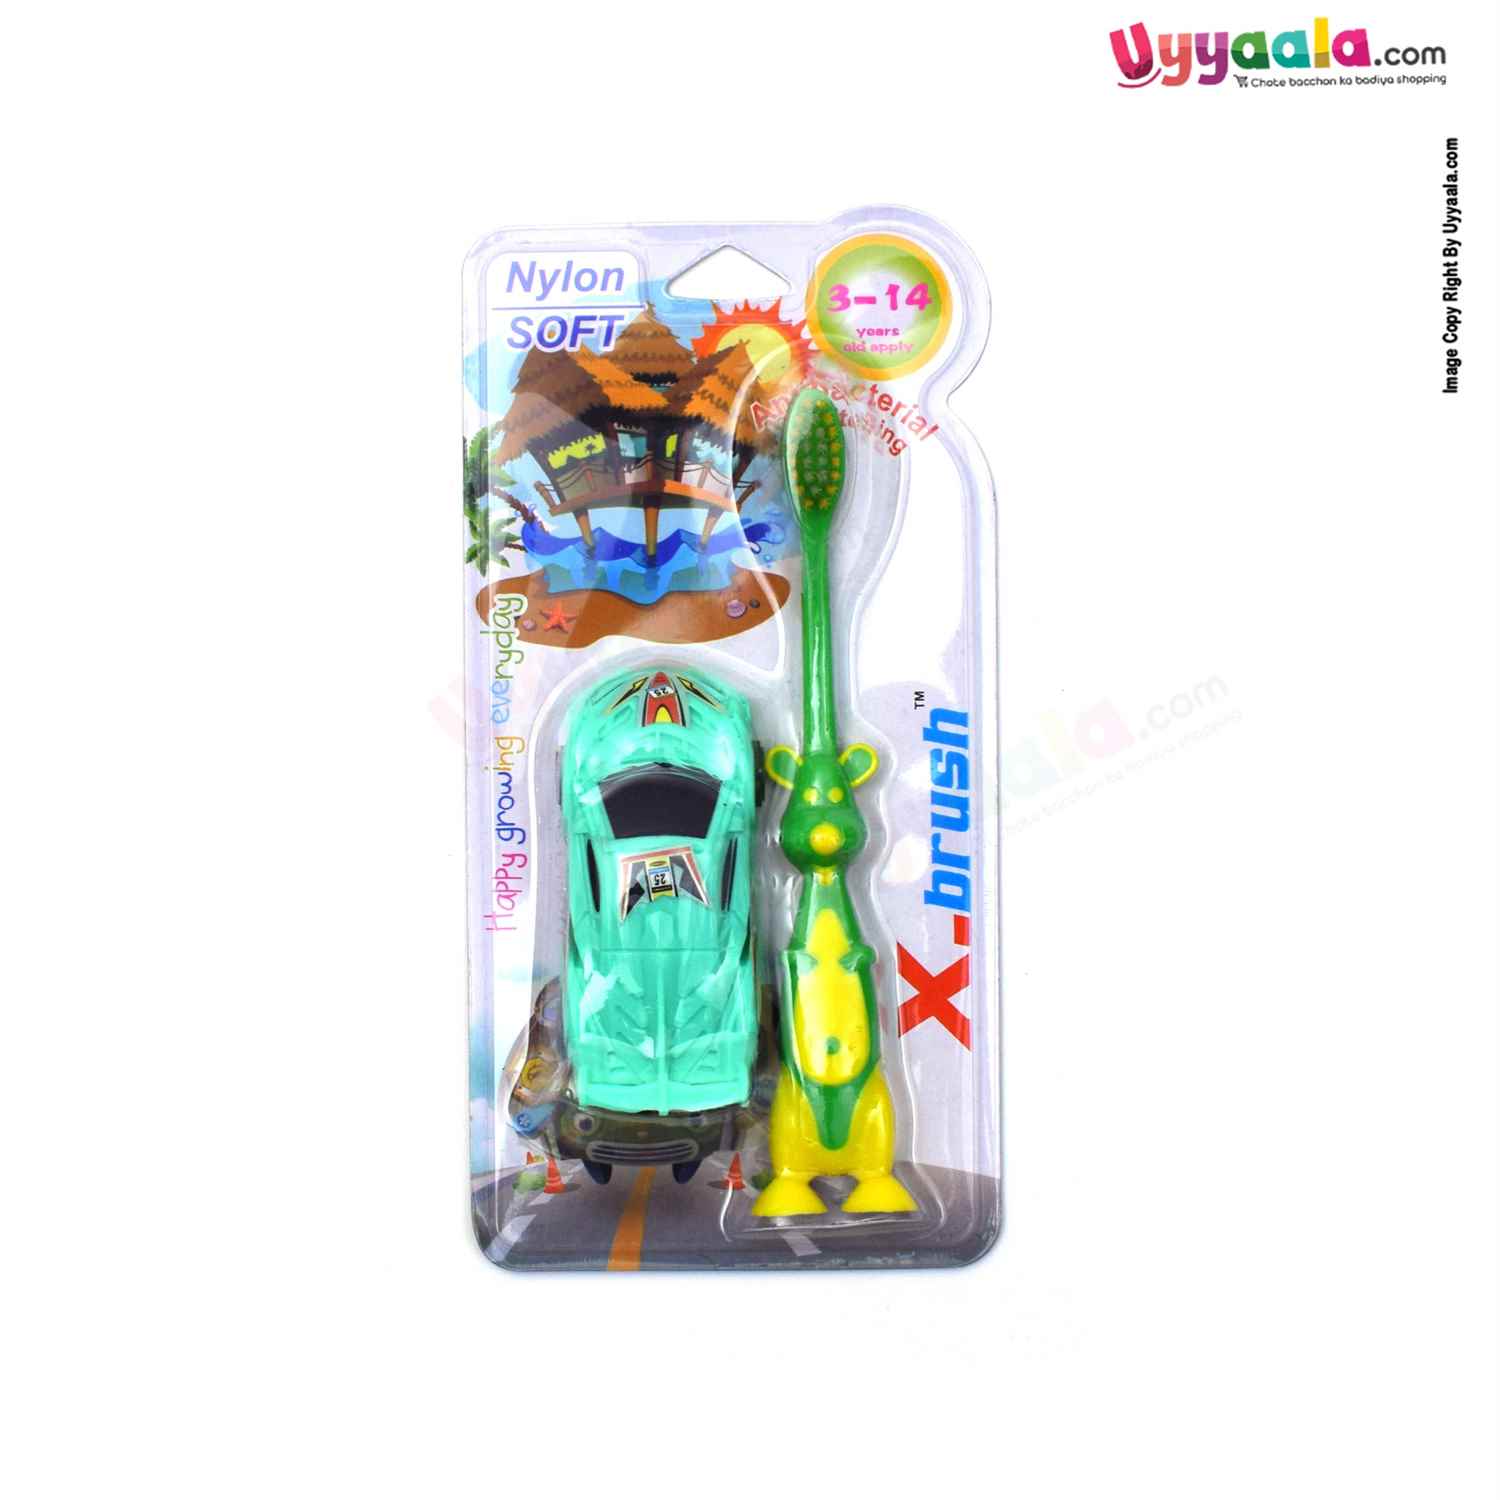 X-BRUSH Nylon Soft Tooth Brush for Kids with Toy Sports Car 3-14 y Age